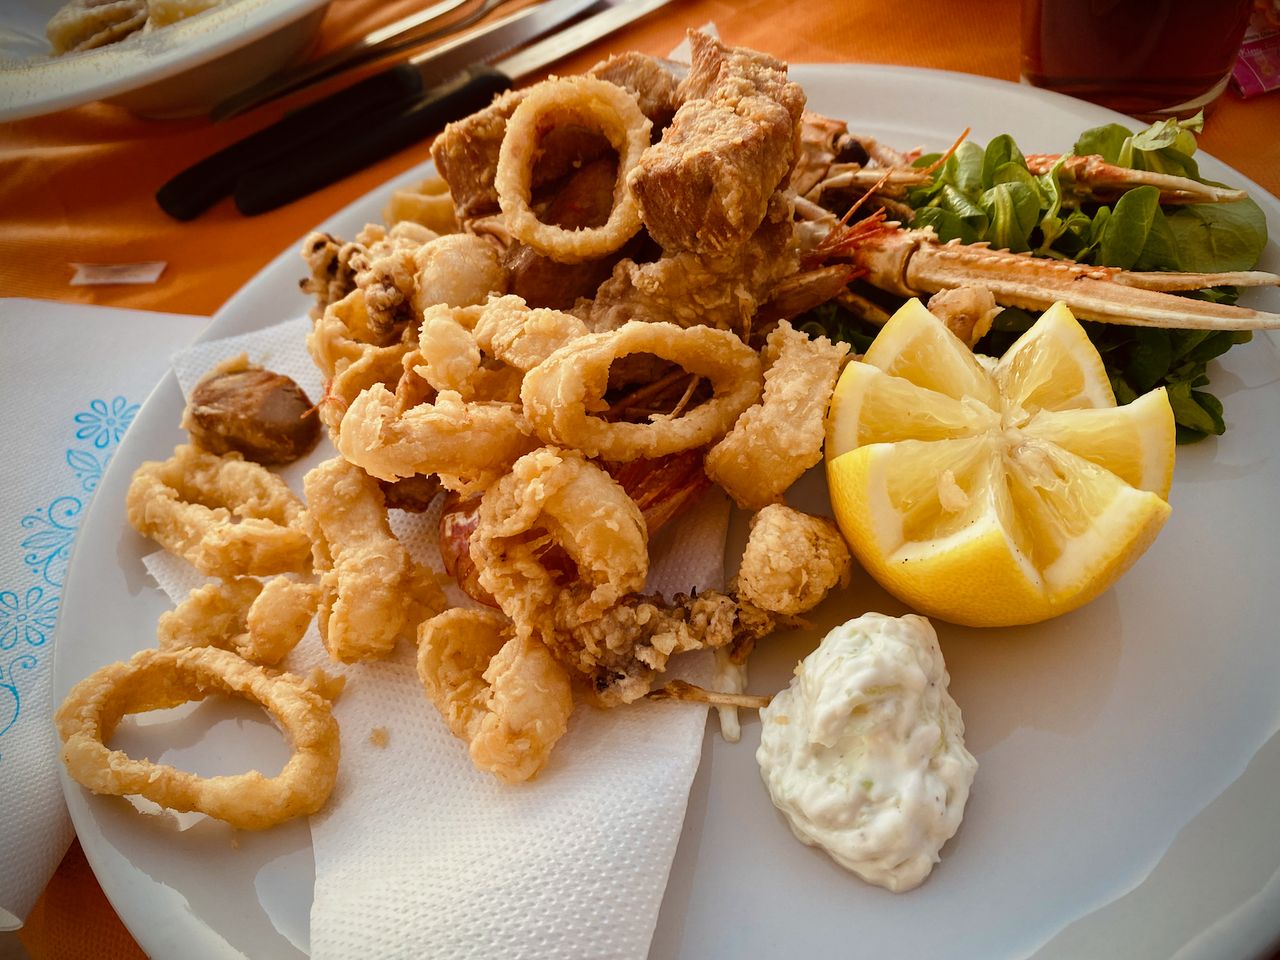 A plate of fried seafood with a decorative lemon.